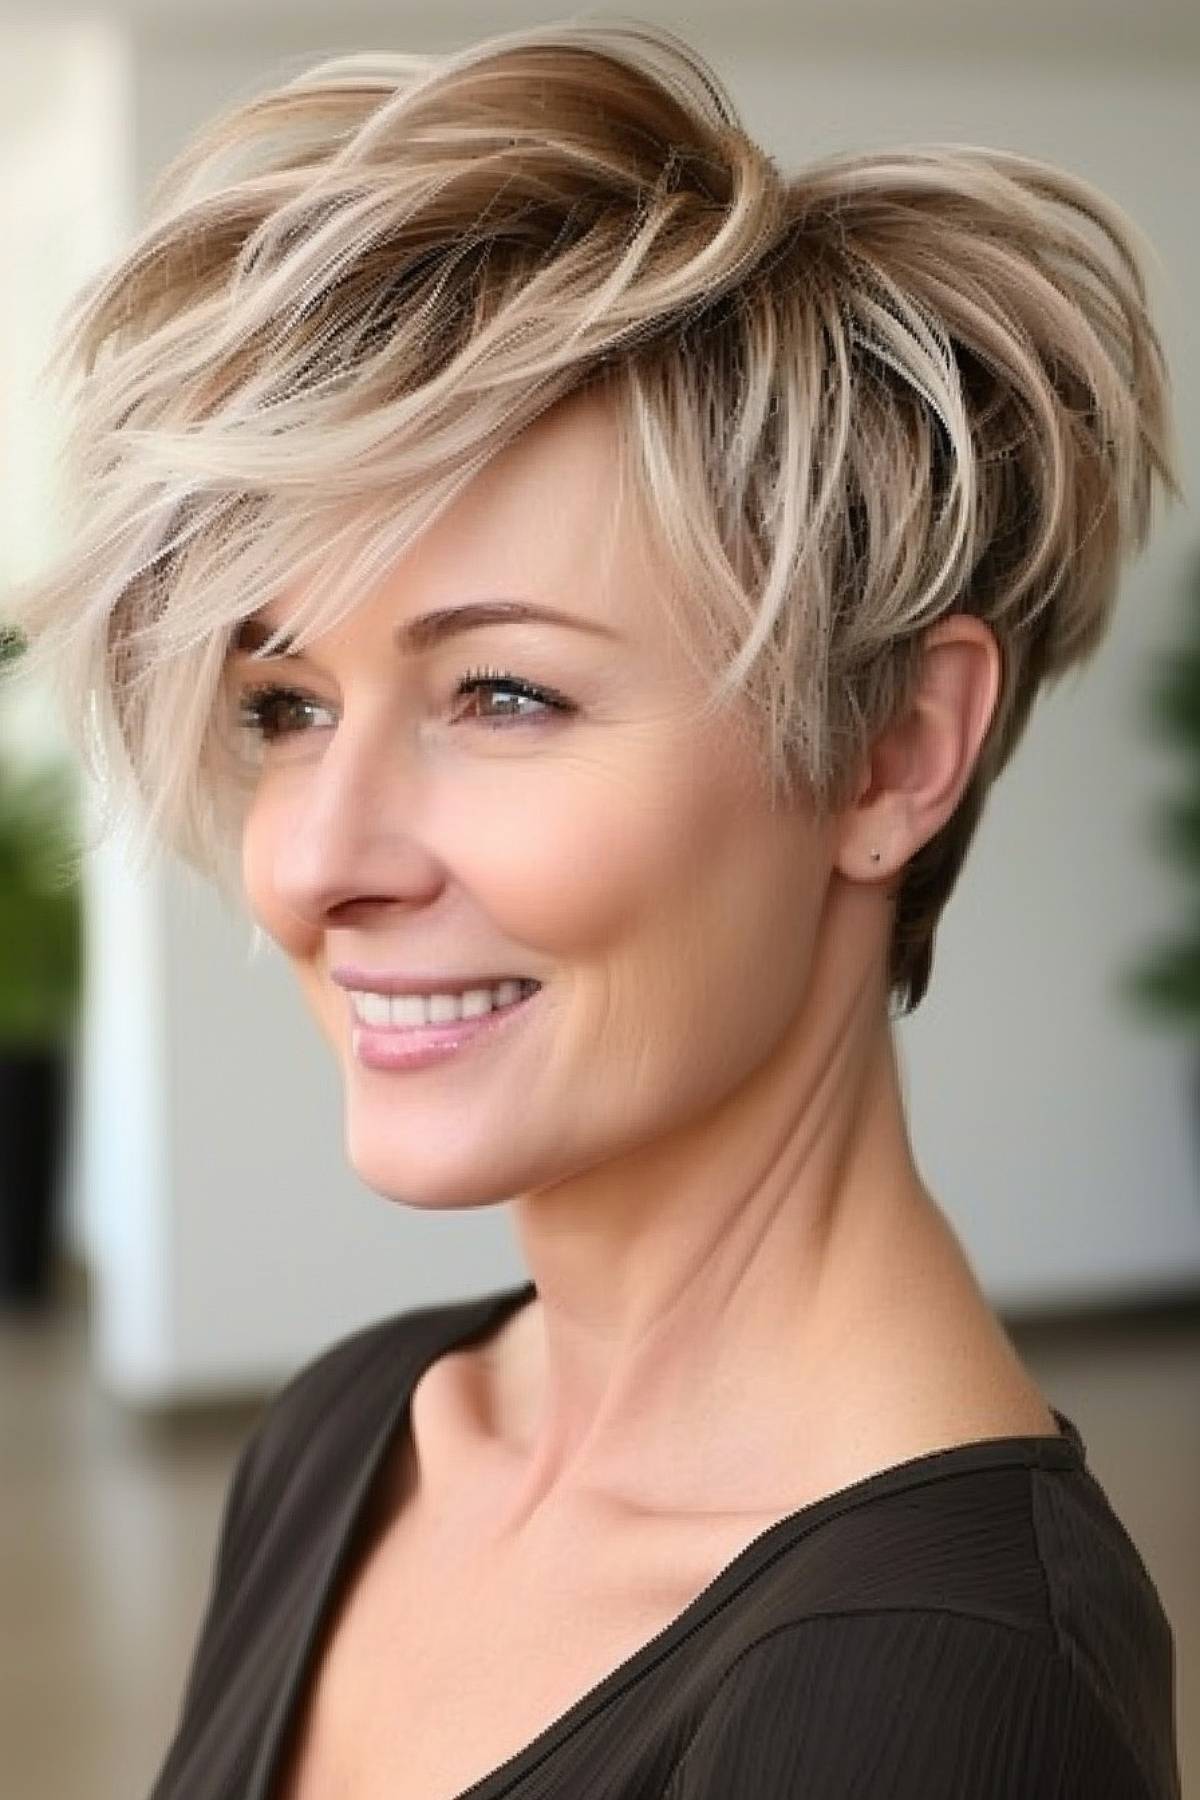 A woman in a short, angled pixie cut with irregular layers adding volume and dynamic movement.